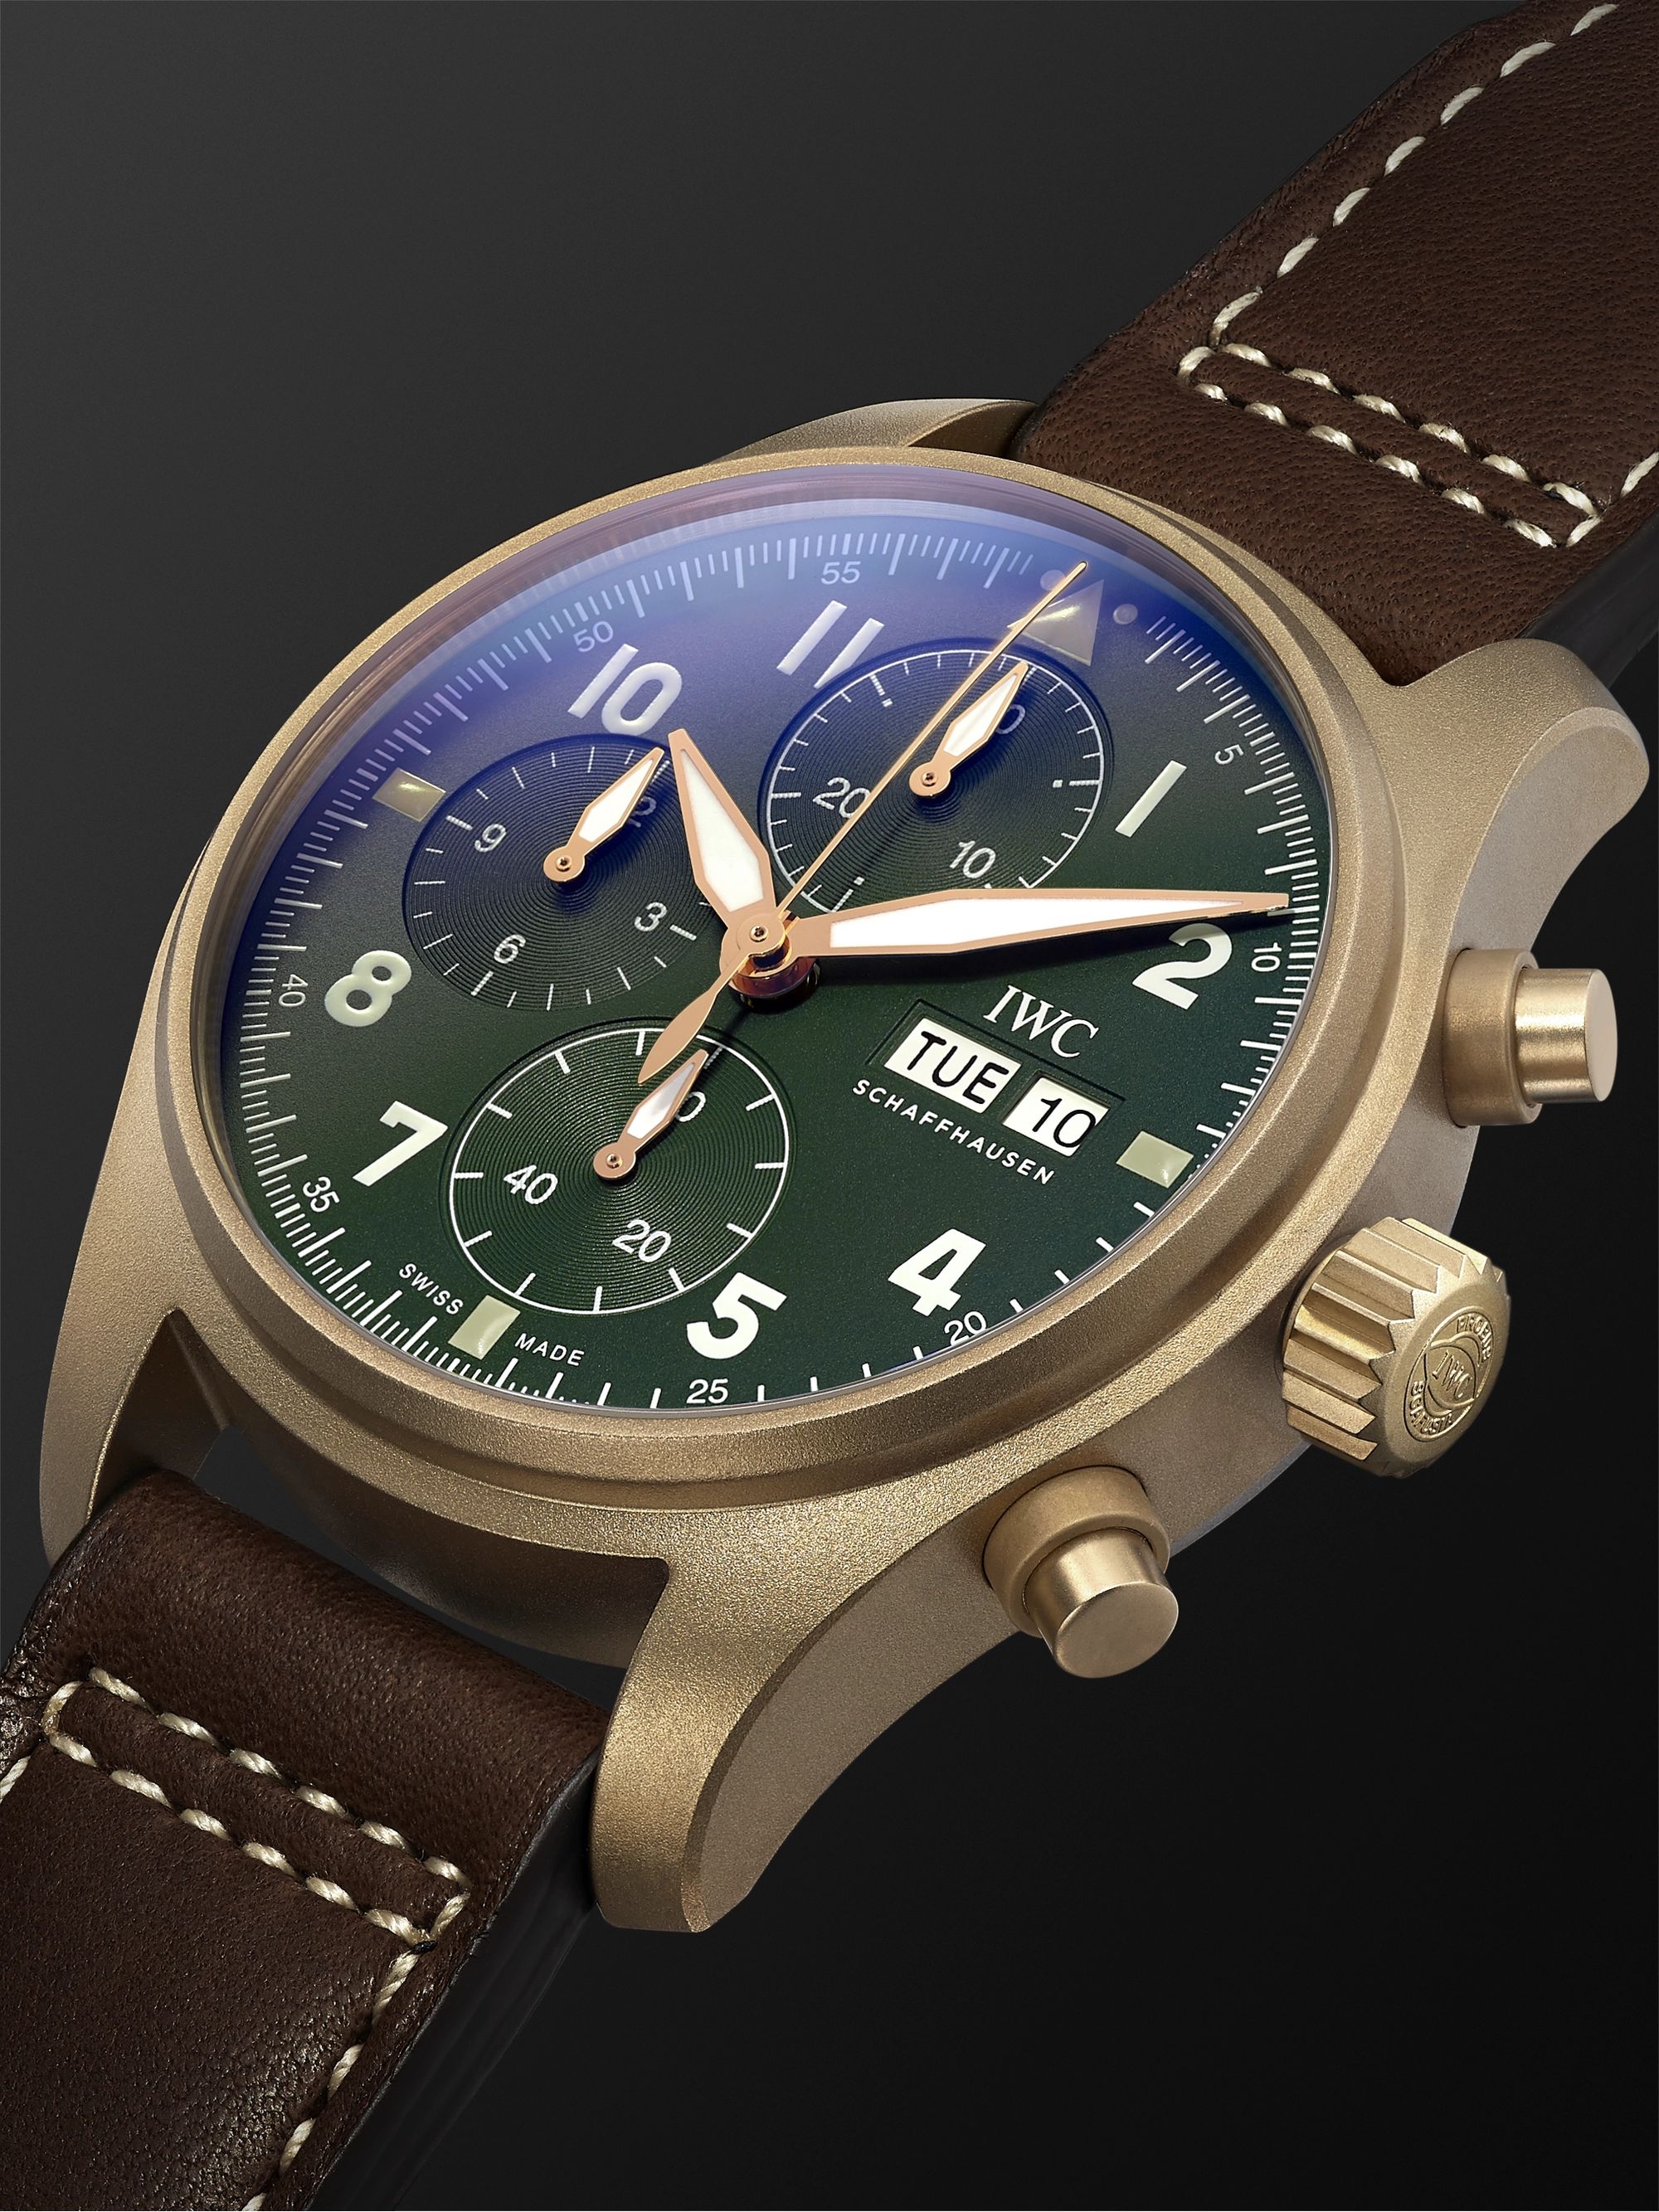 IWC SCHAFFHAUSEN Pilot's Spitfire Automatic Chronograph 41mm Bronze and Leather Watch, Ref. No. IW387902